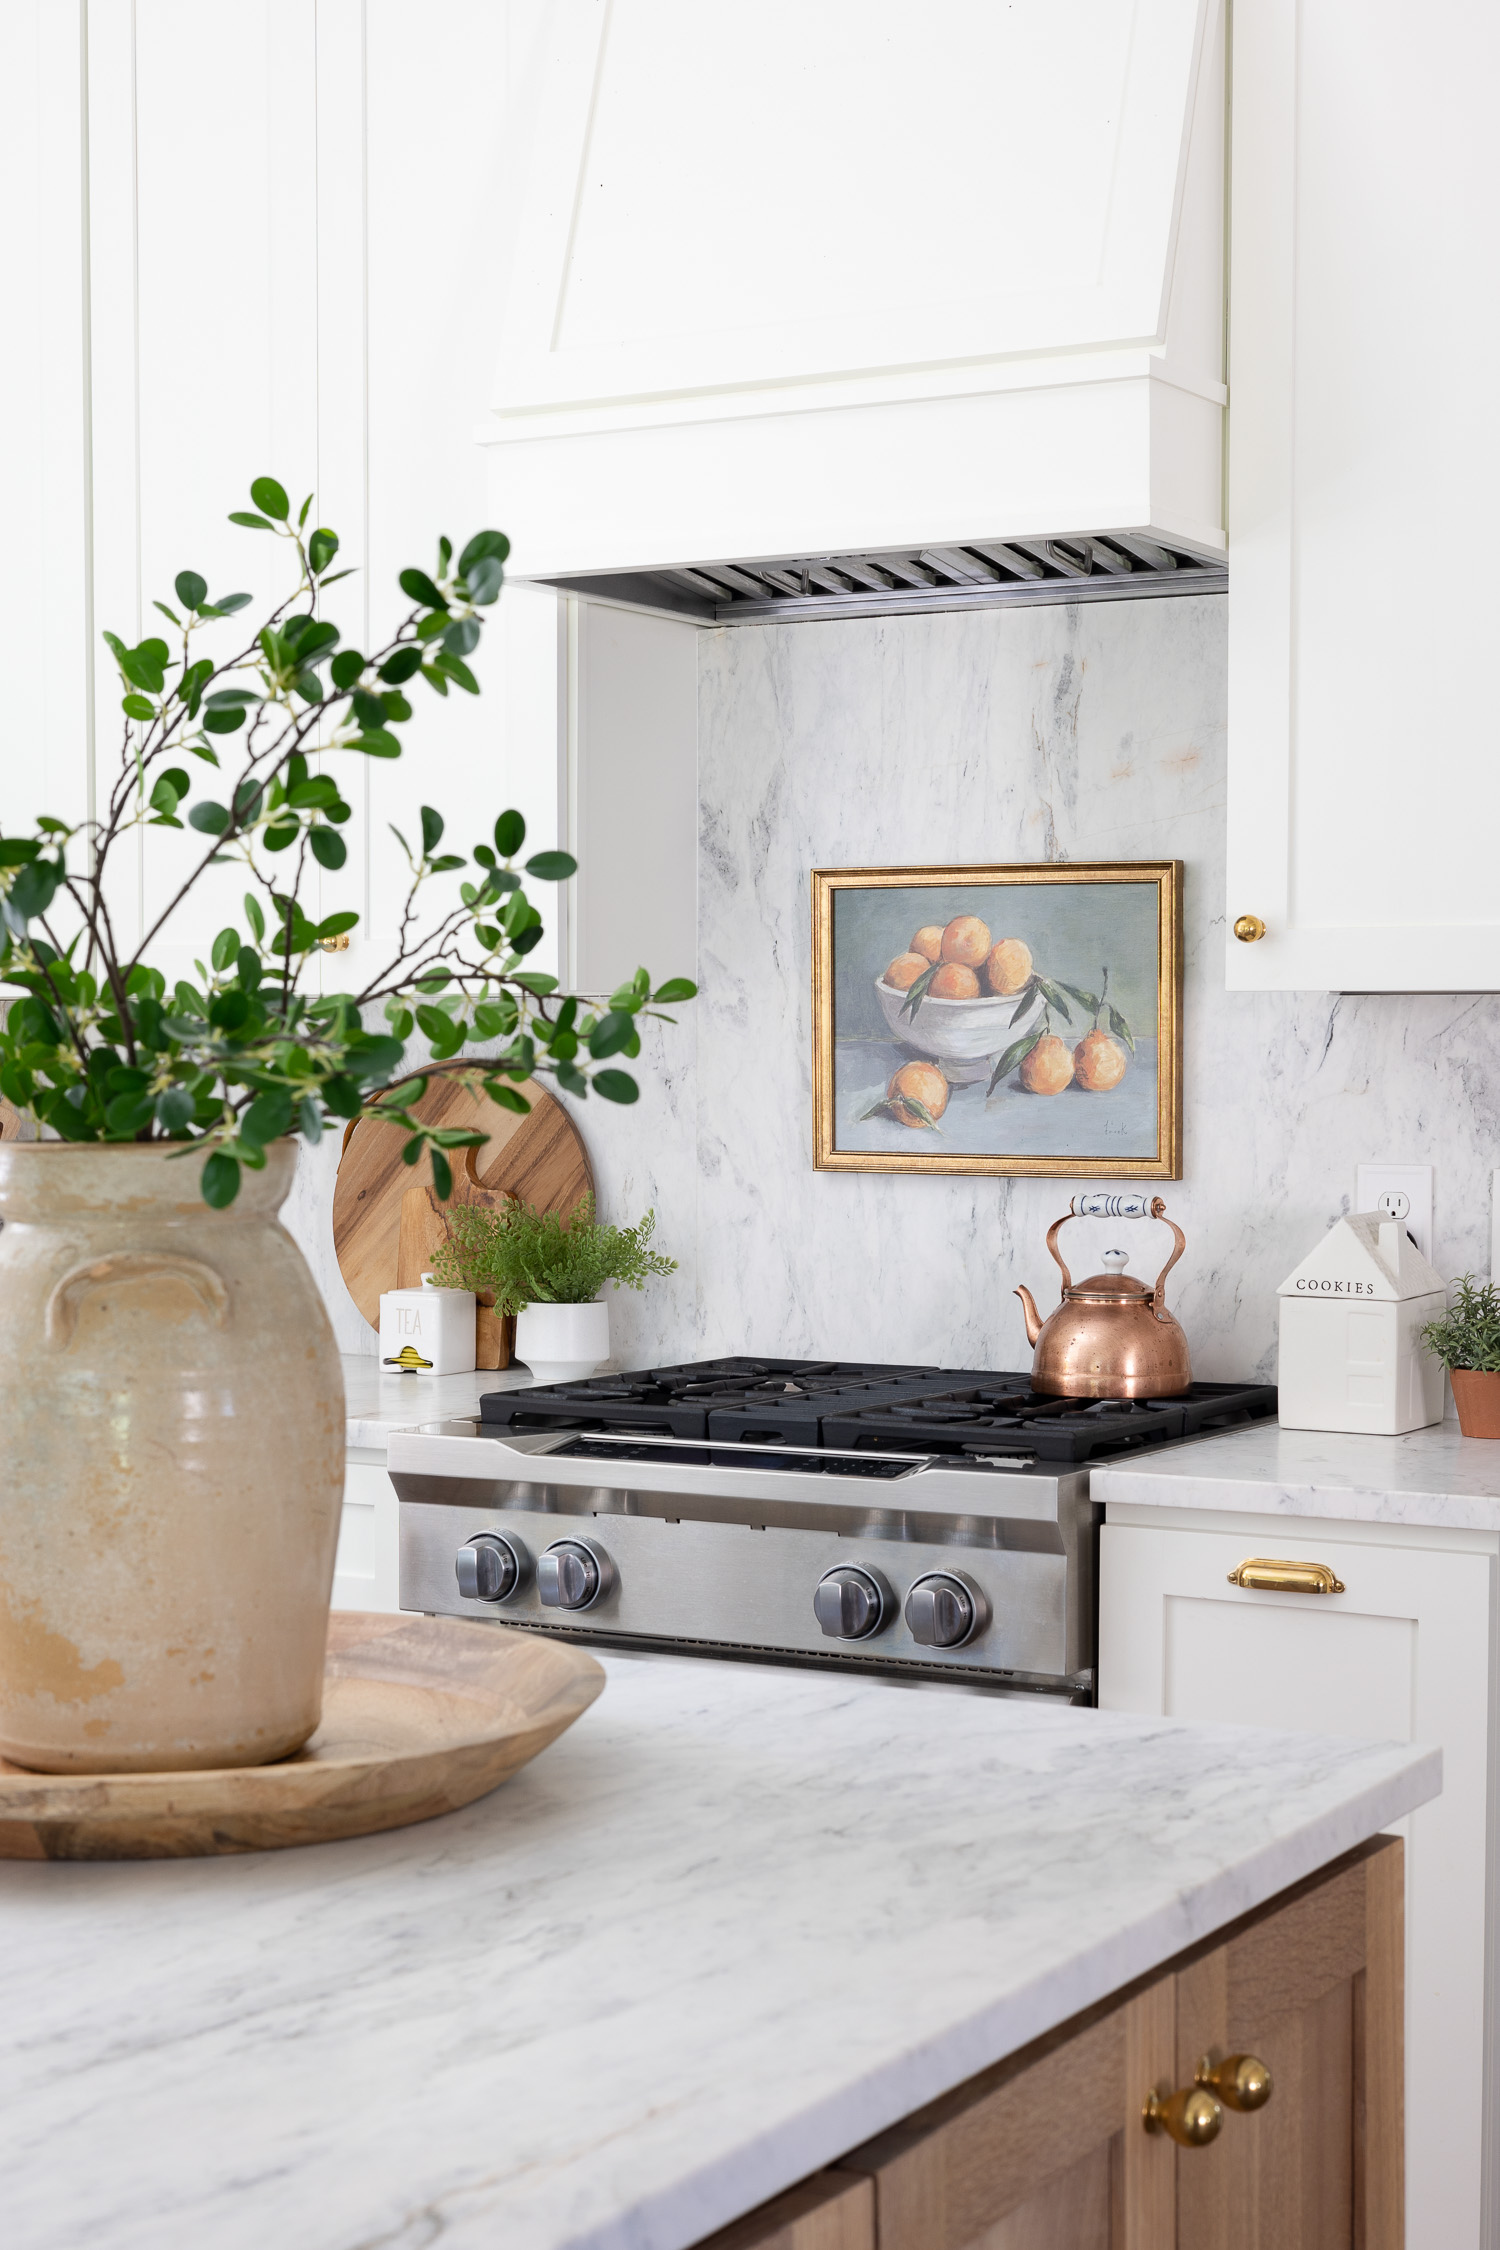 vase of greenery sitting on countertop and picture above the range